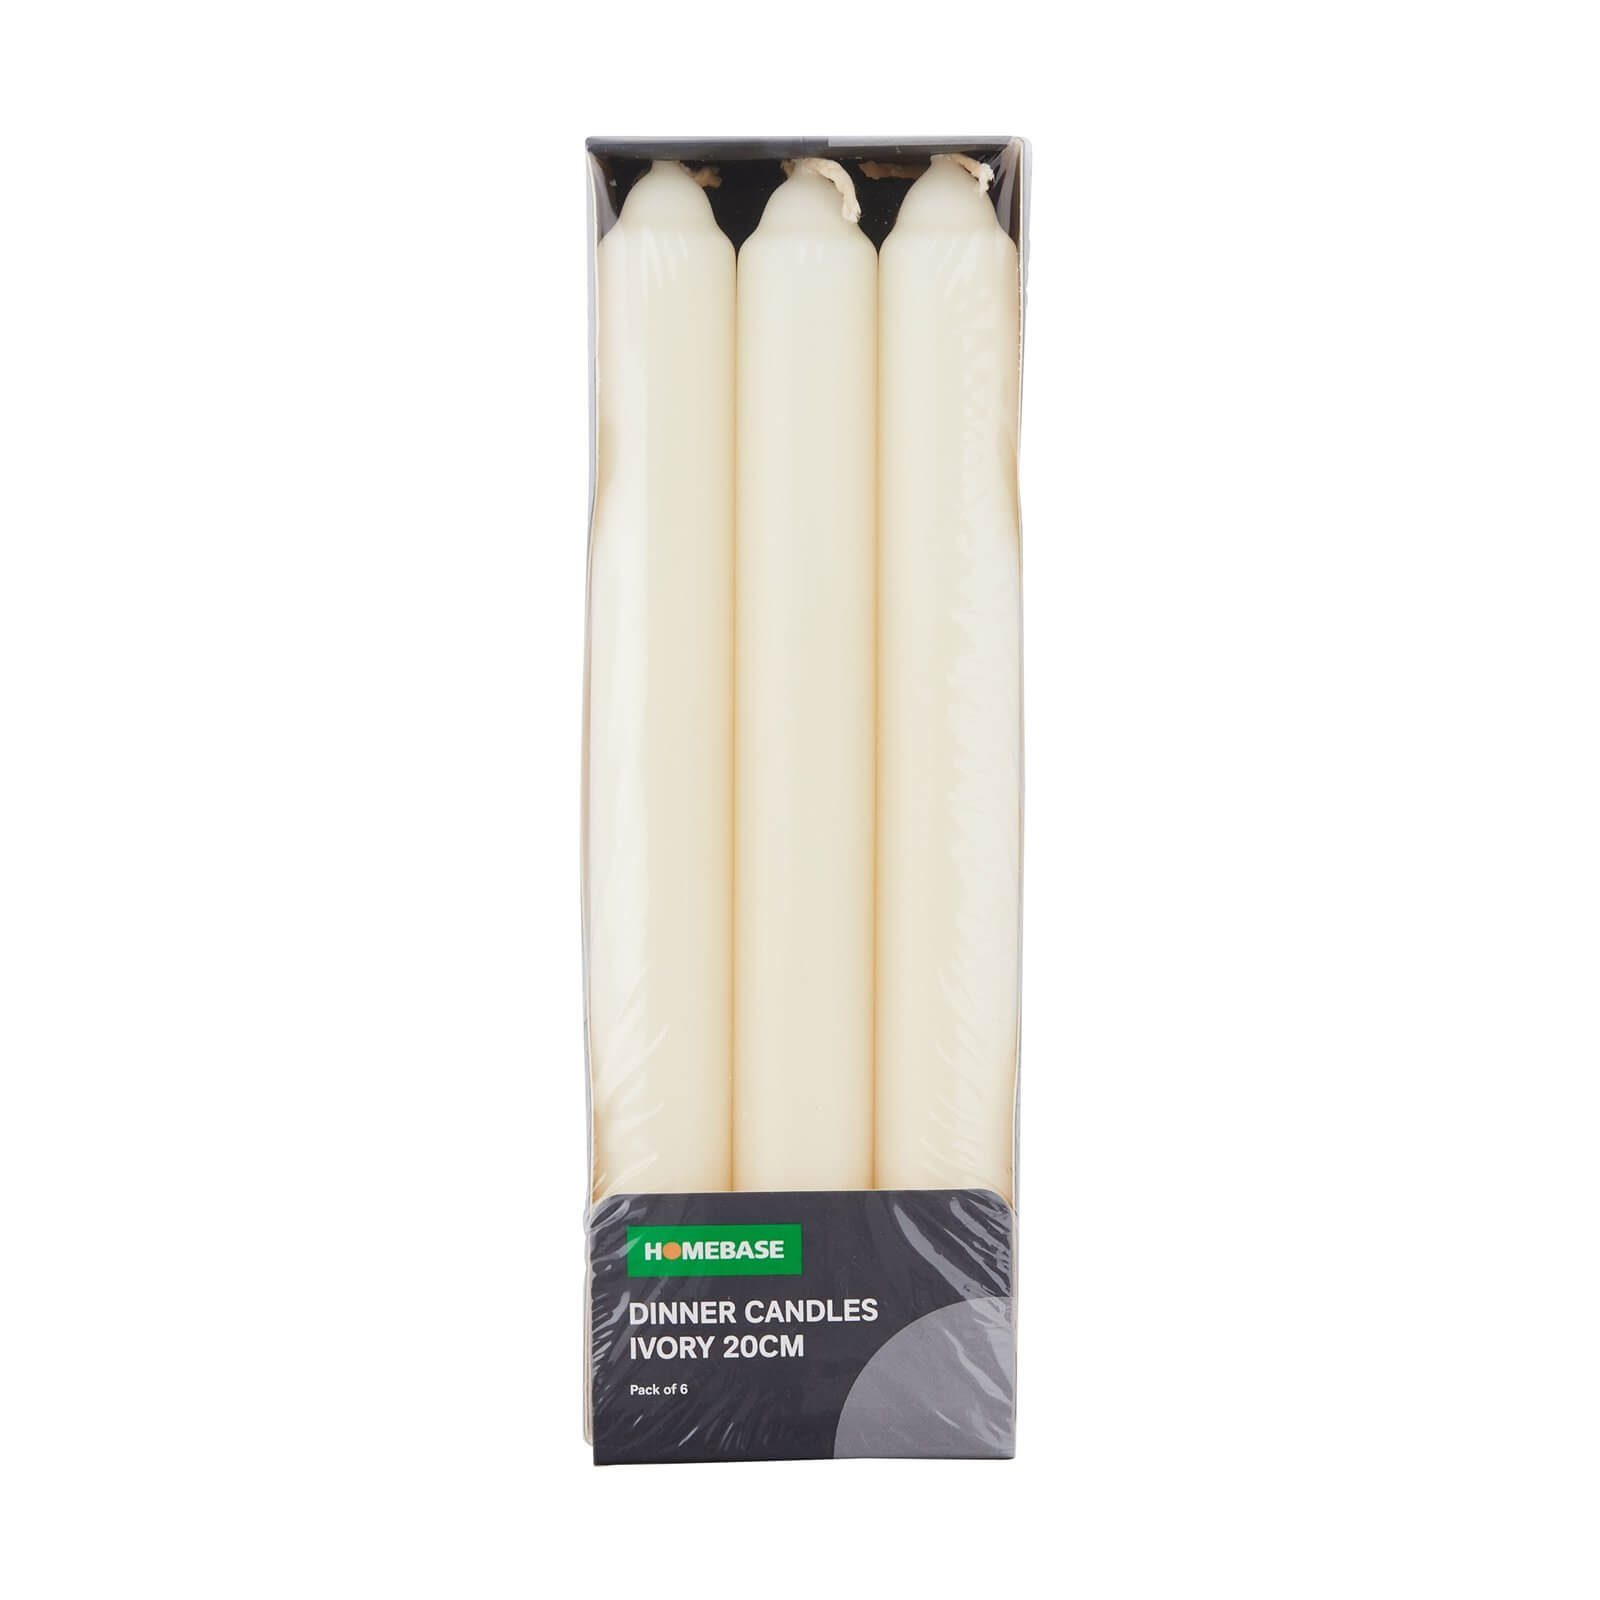 Photo of Pack Of 6 Dinner Candles - Ivory - 20cm